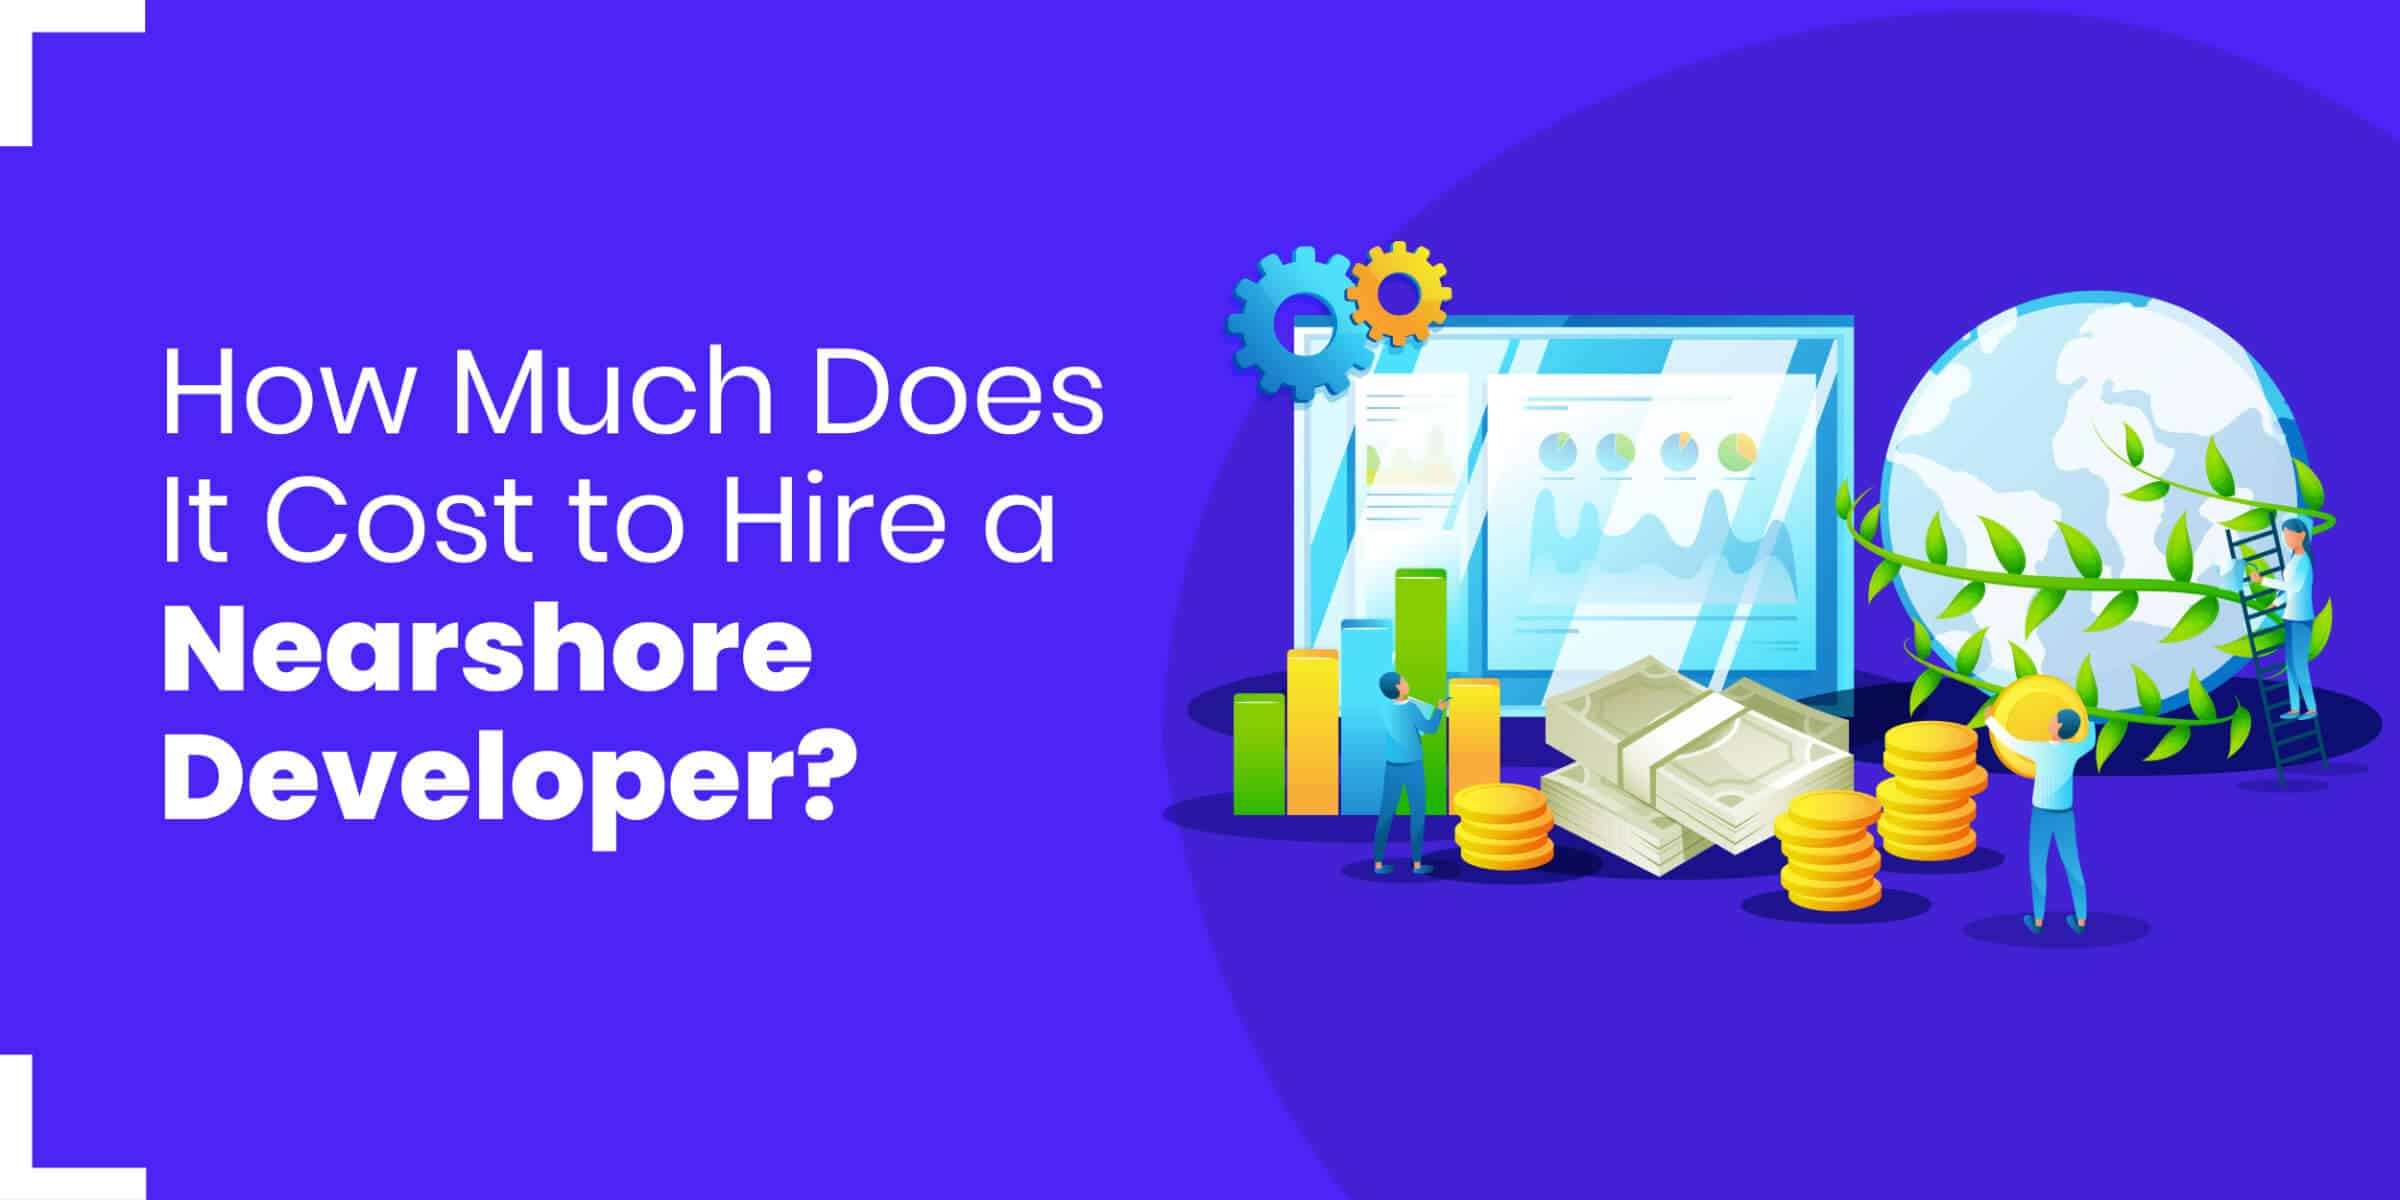 How Much Does It Cost to Hire Nearshore Developer